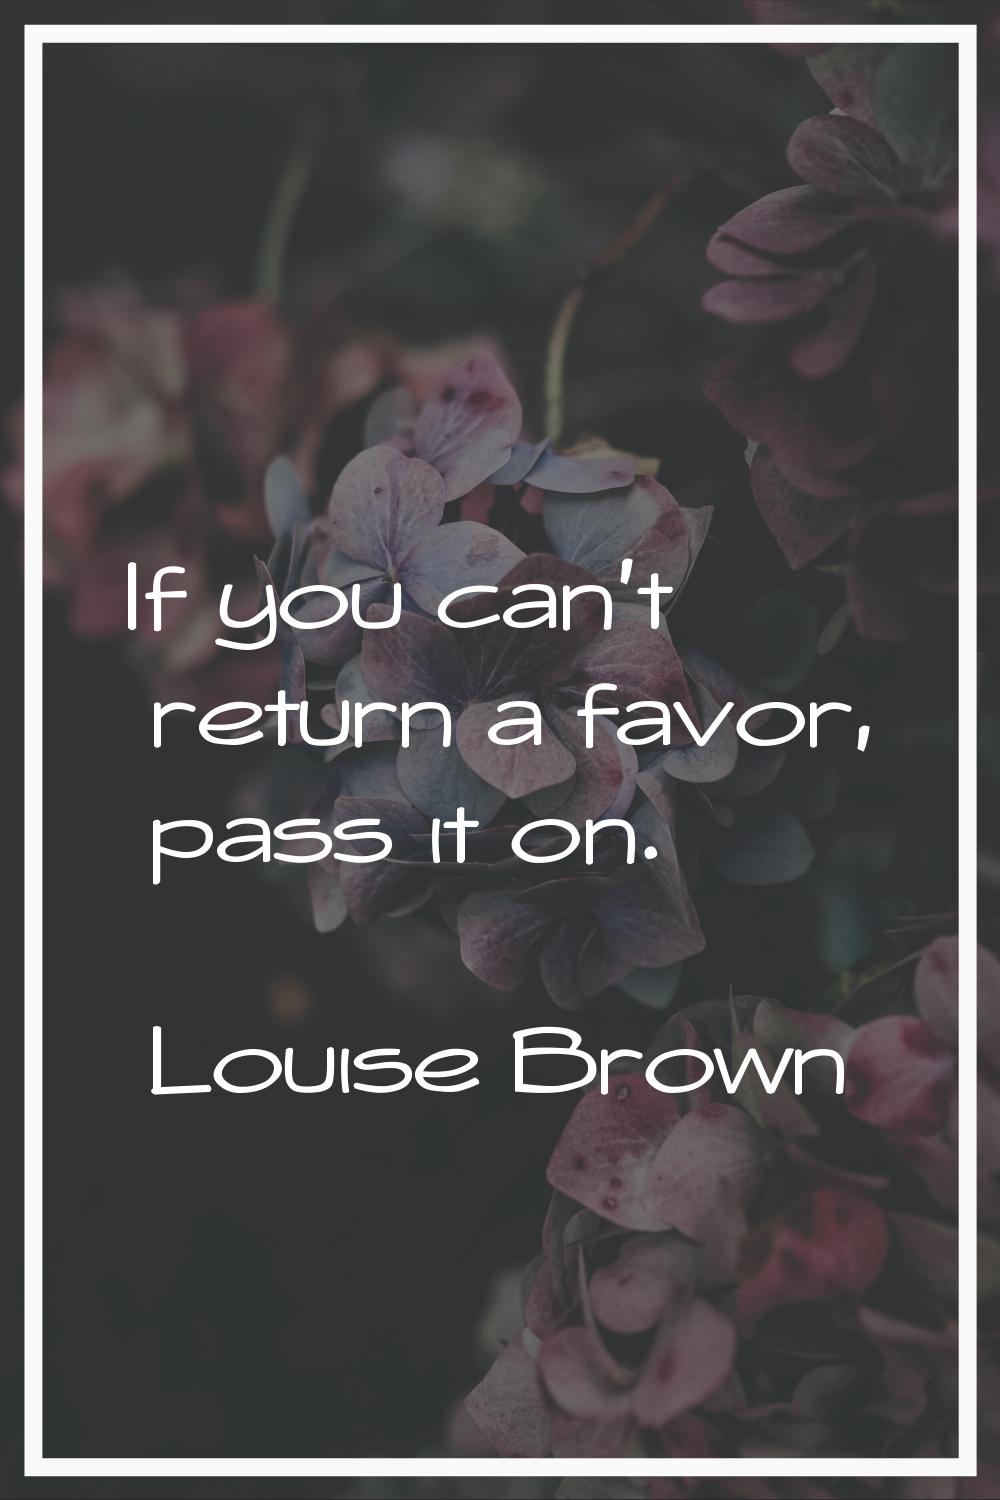 If you can't return a favor, pass it on.